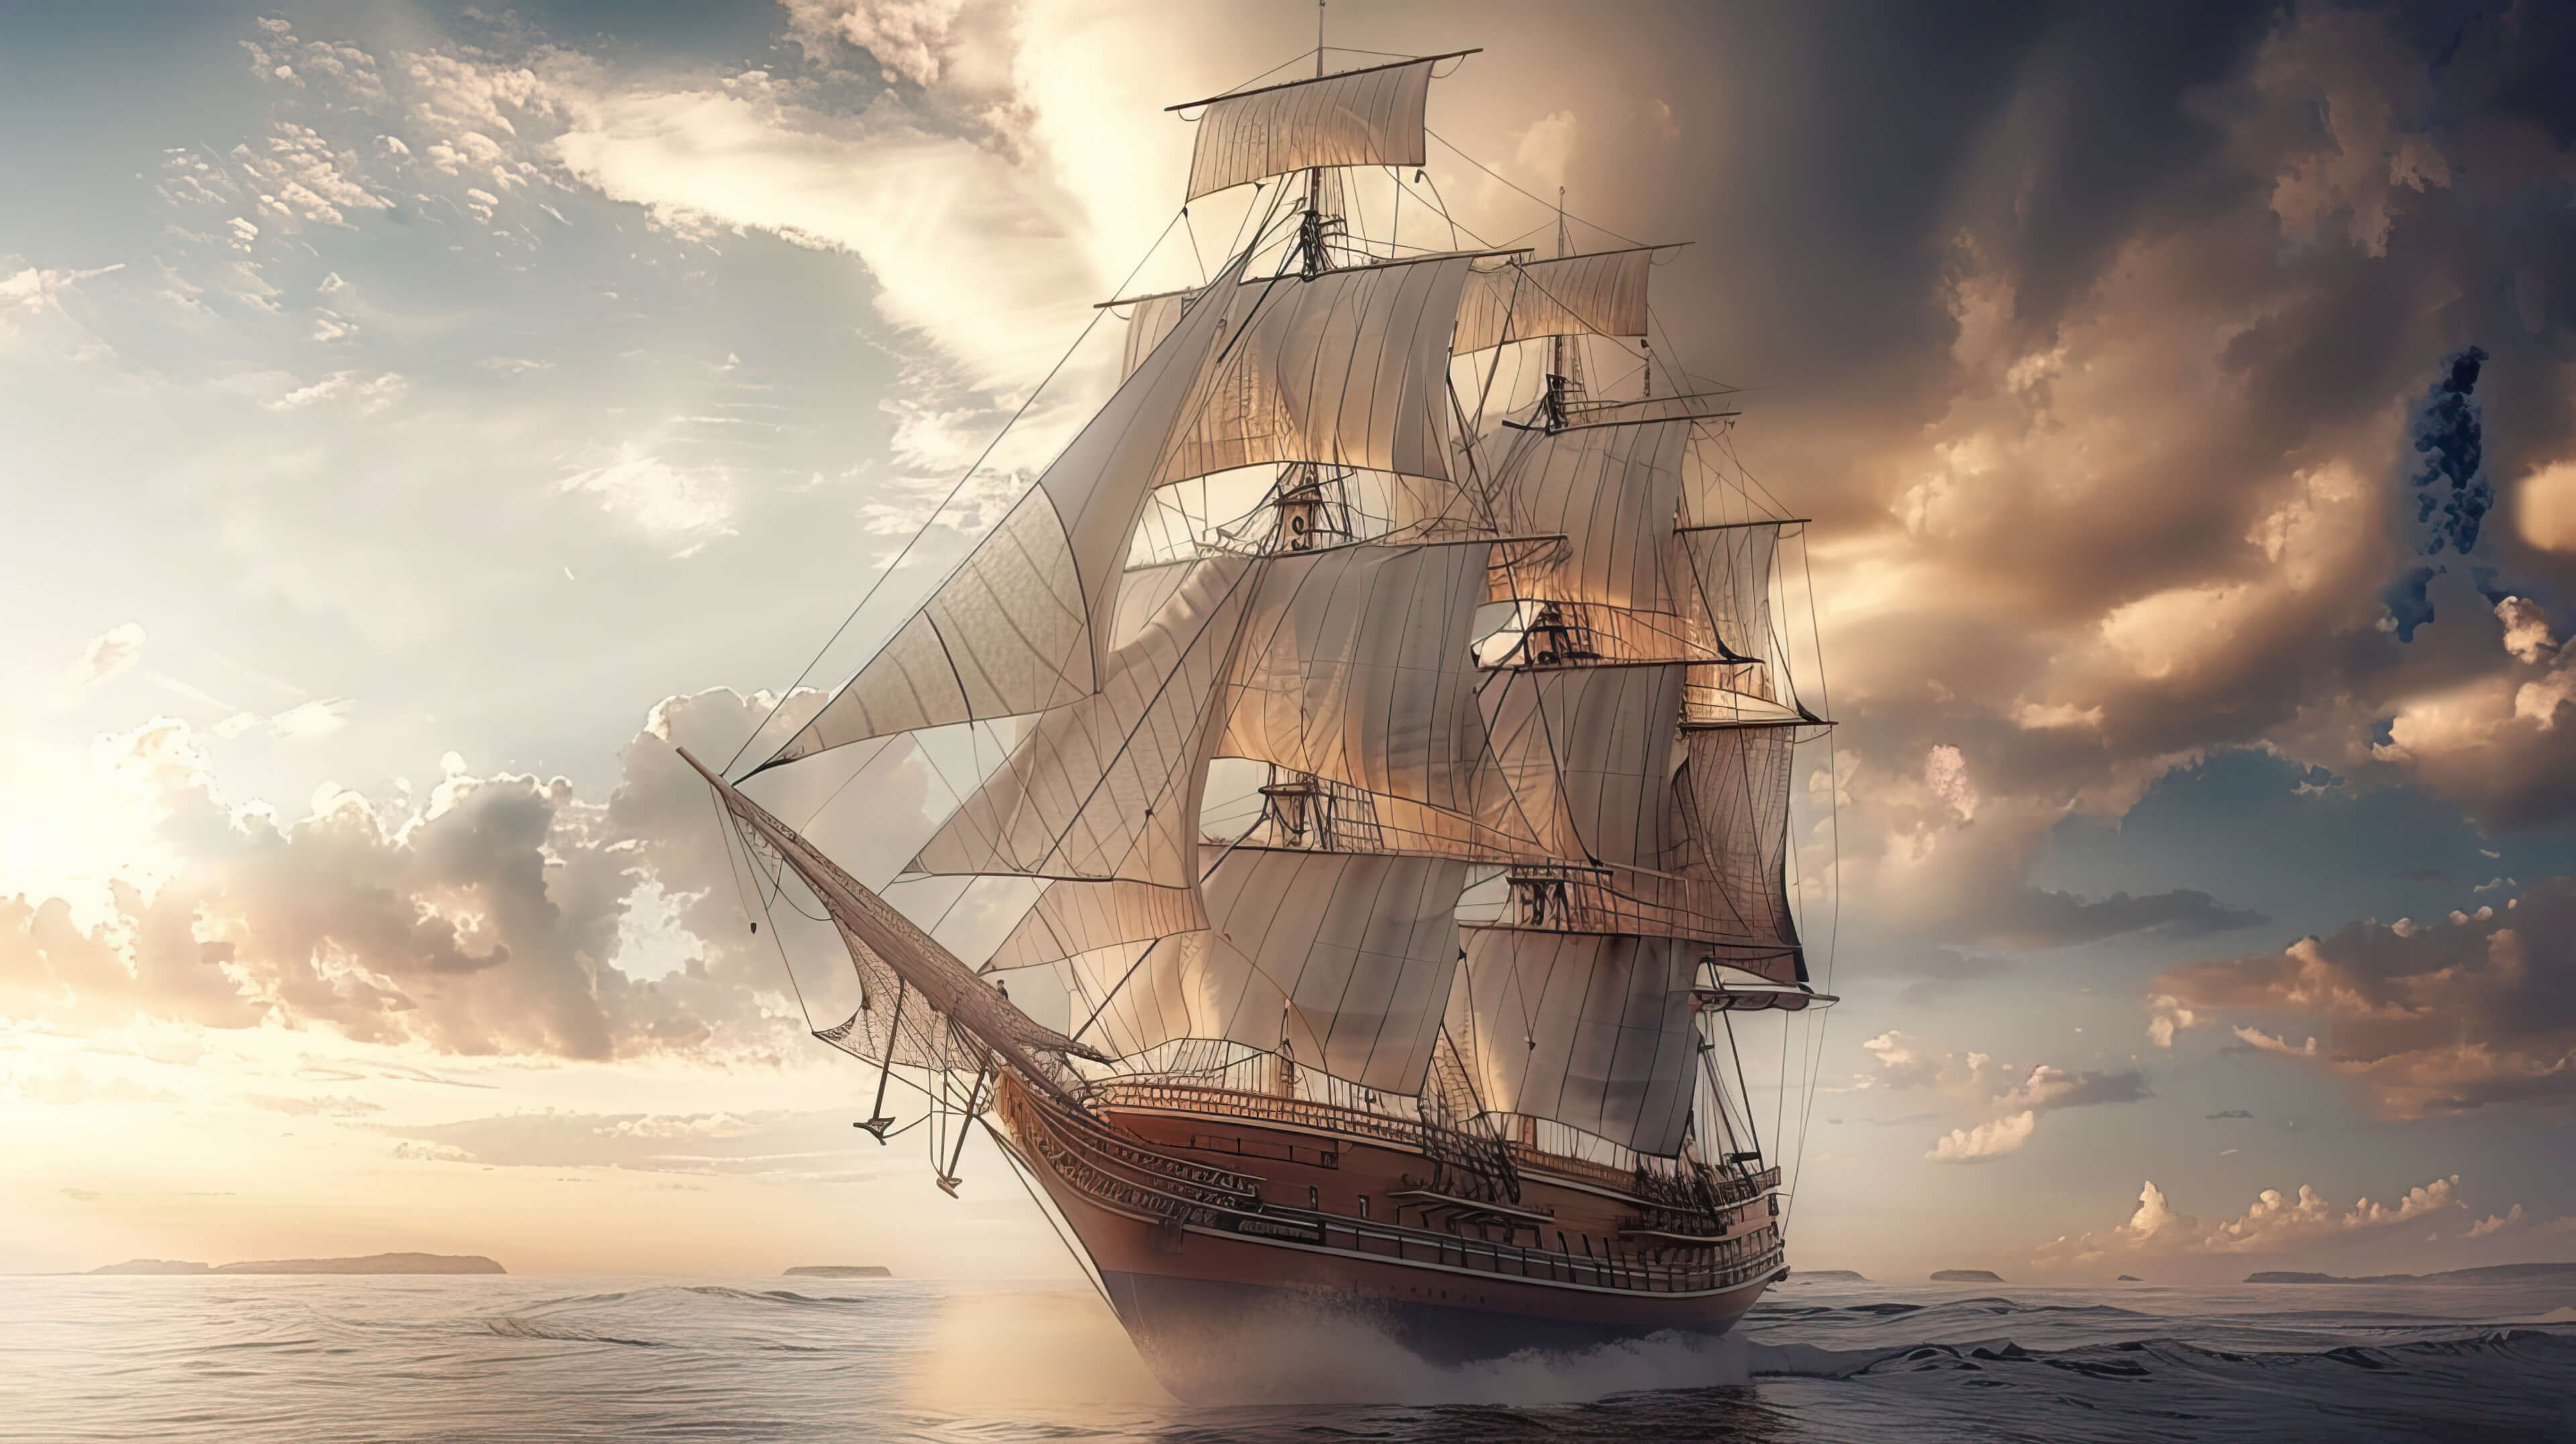 A majestic tall ship with billowing sails, reminiscent of a bygone era of exploration and adventure on the high seas